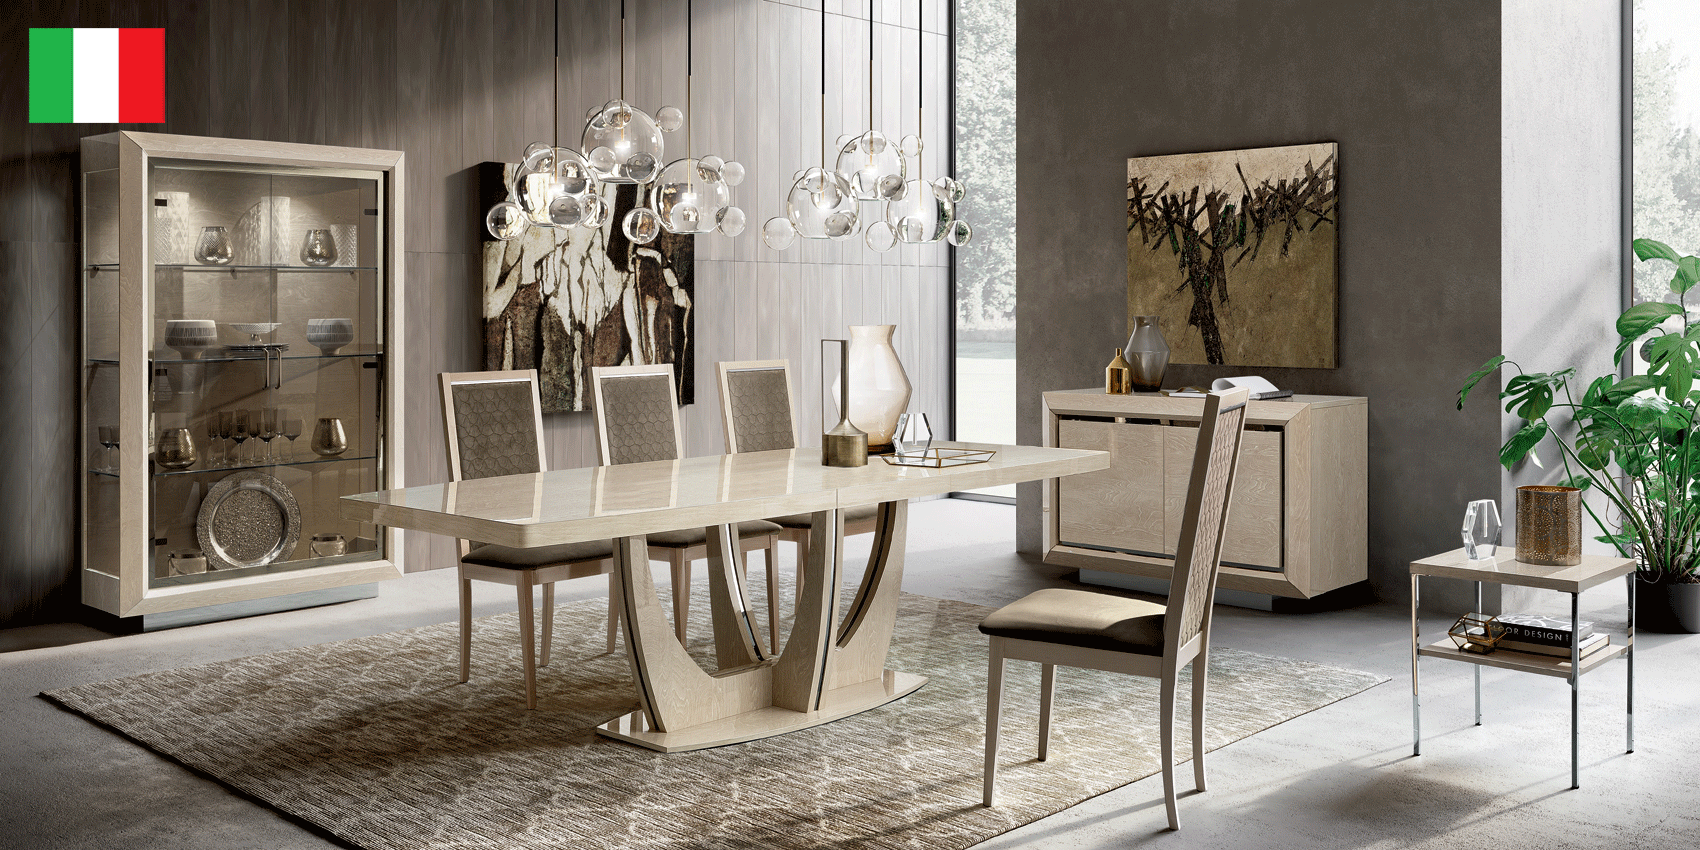 Wallunits Hallway Console tables and Mirrors Elite Dining Ivory with Ambra “Rombi” Chairs